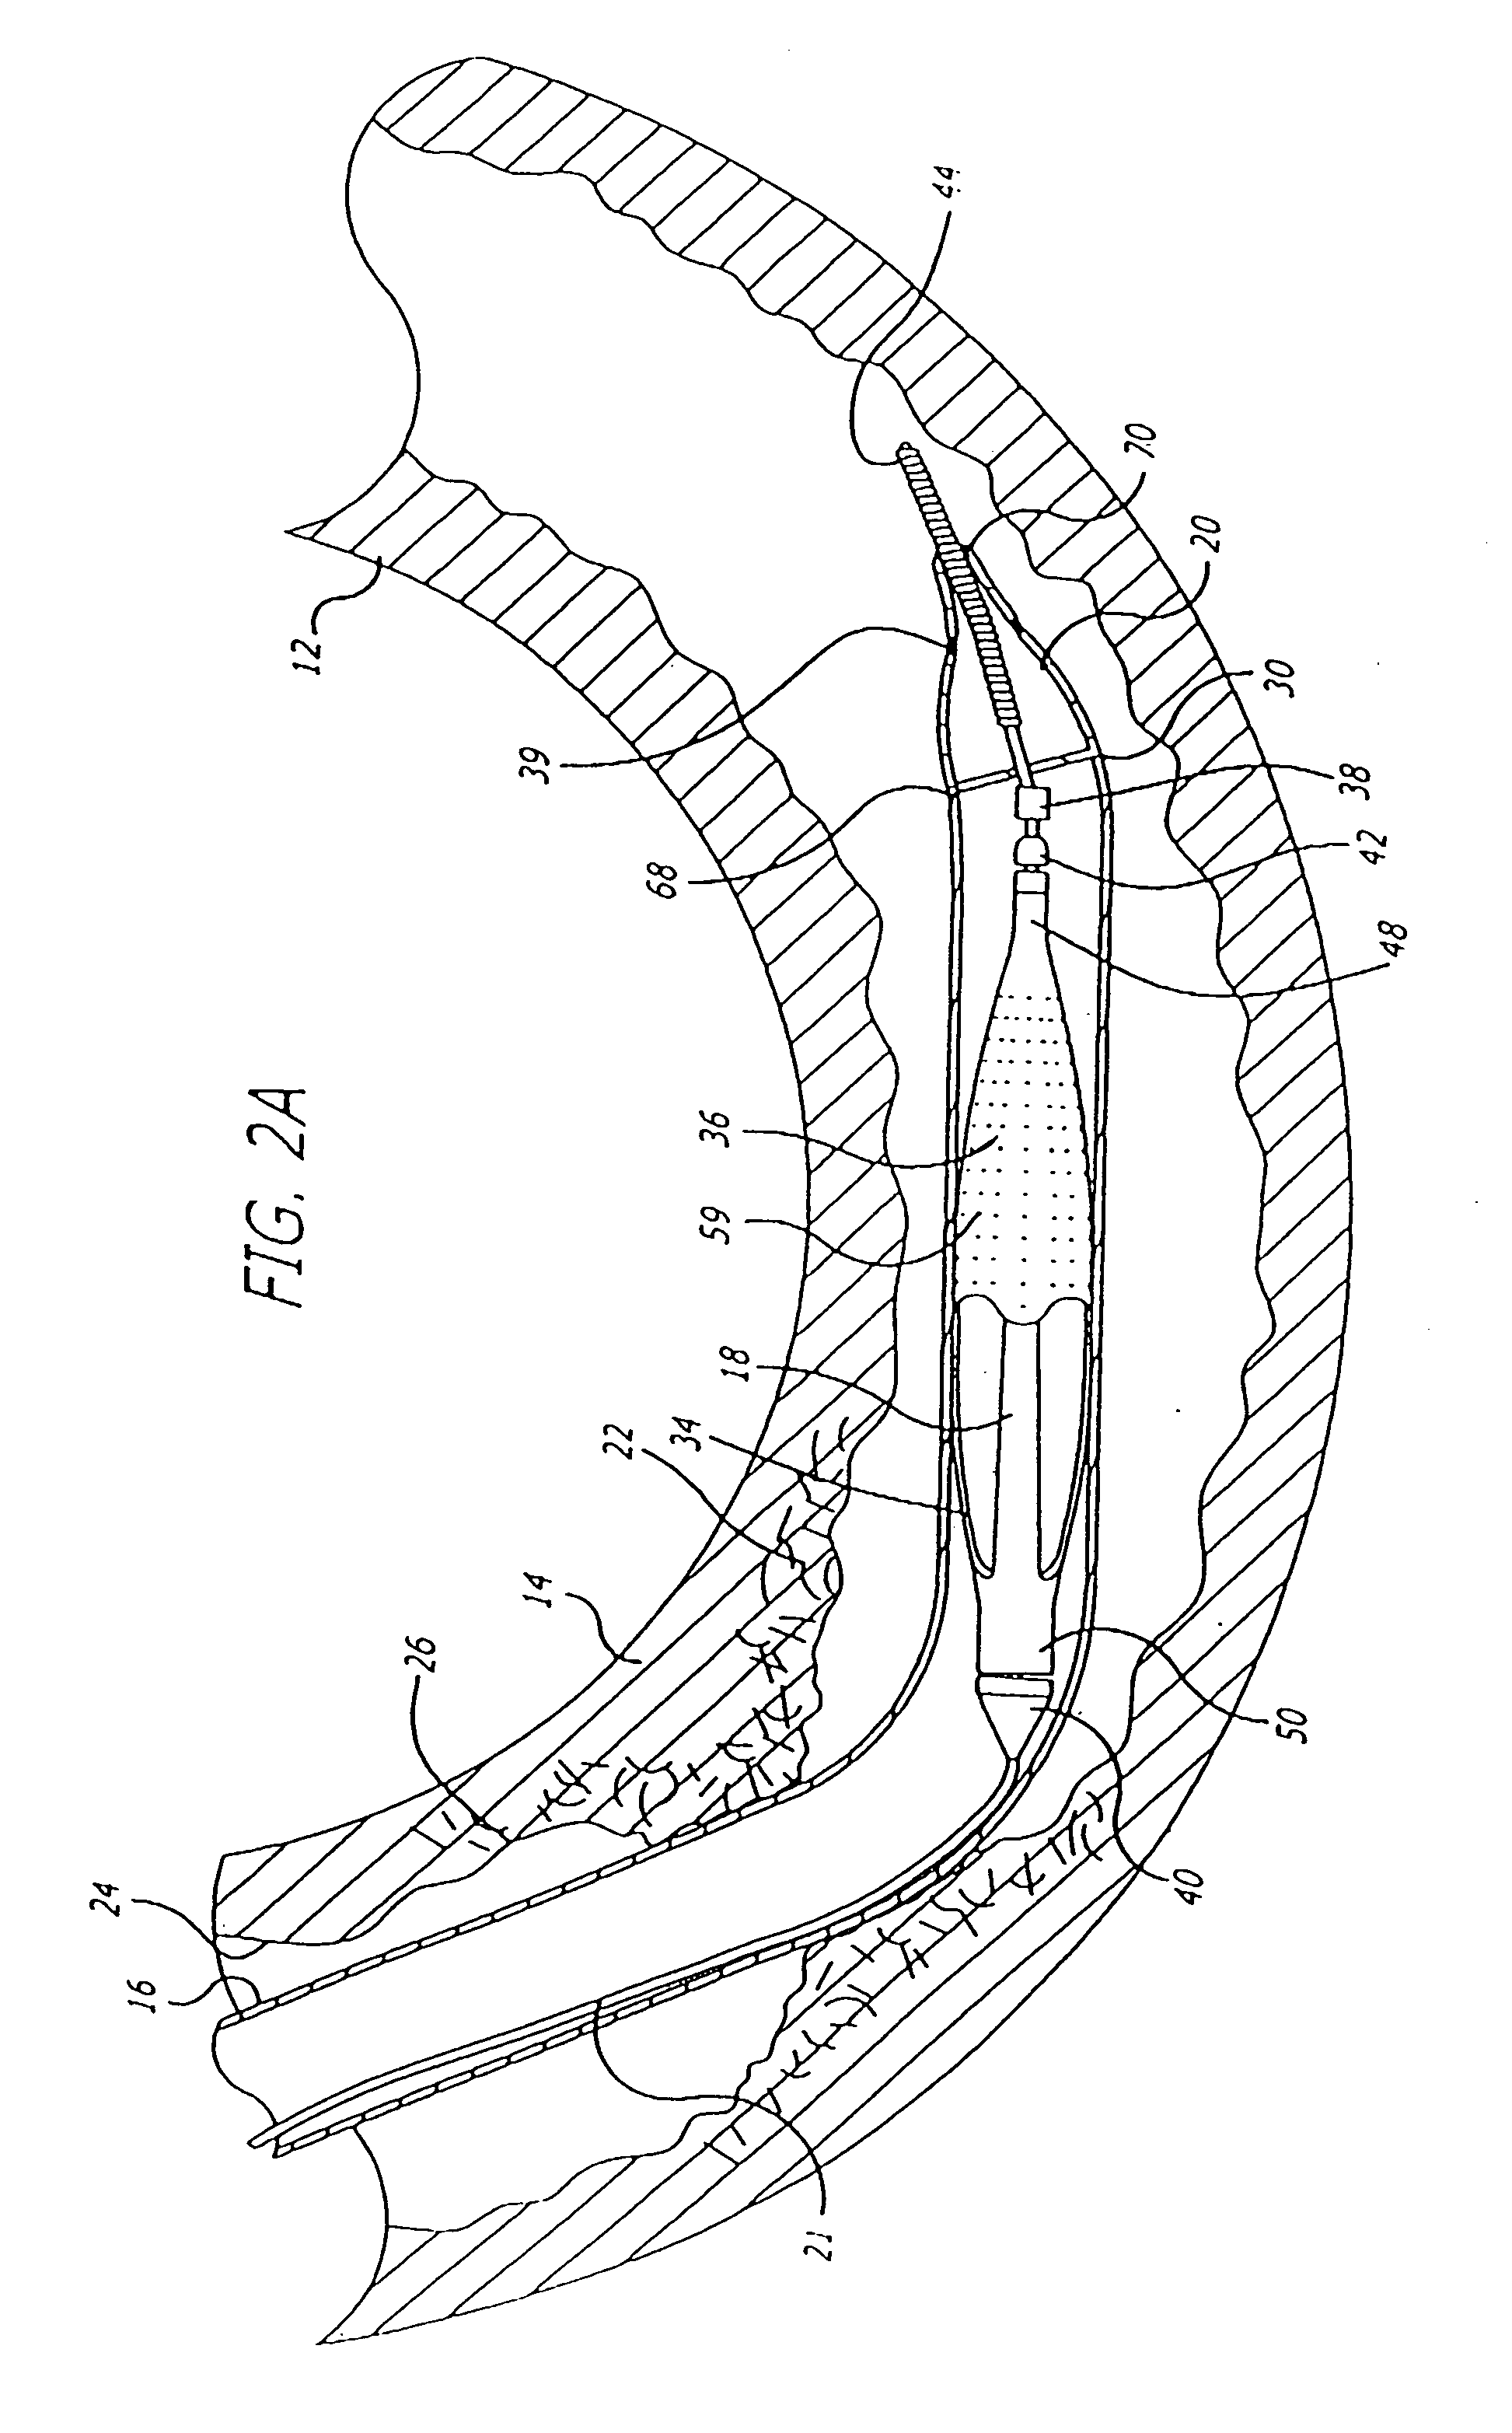 Hinged short cage for an embolic protection device